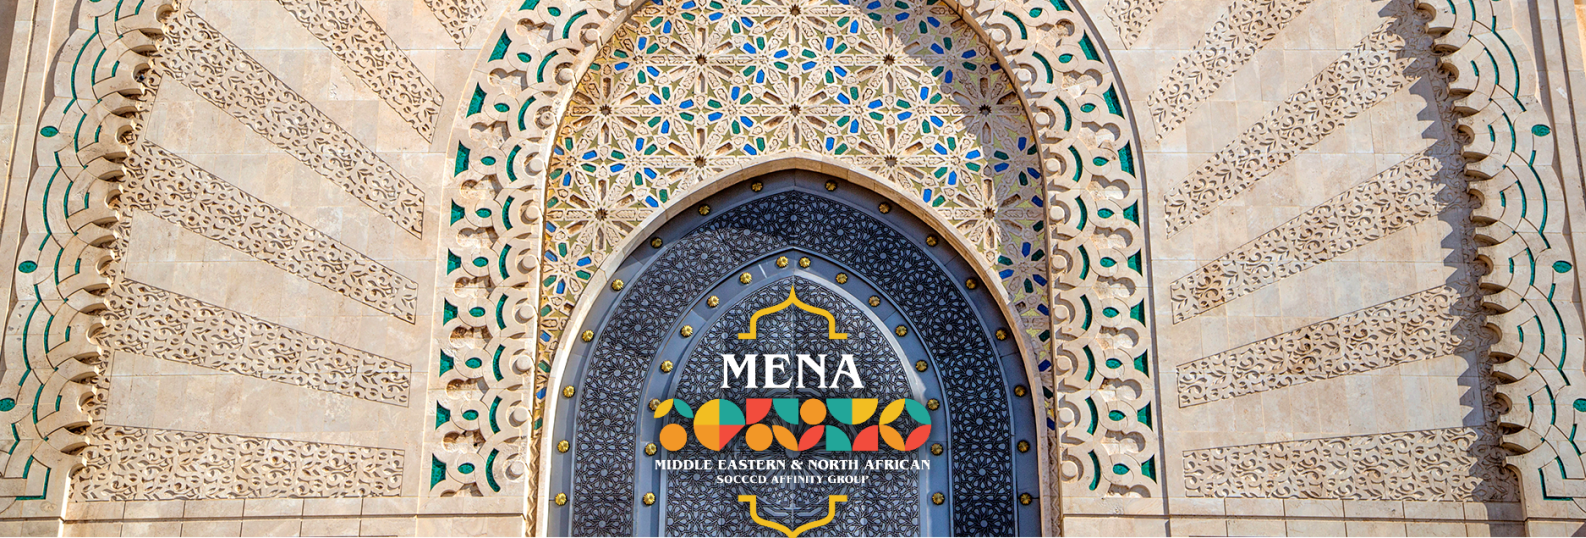 mosaic pattern arched doorway with logo for MENA affinity group